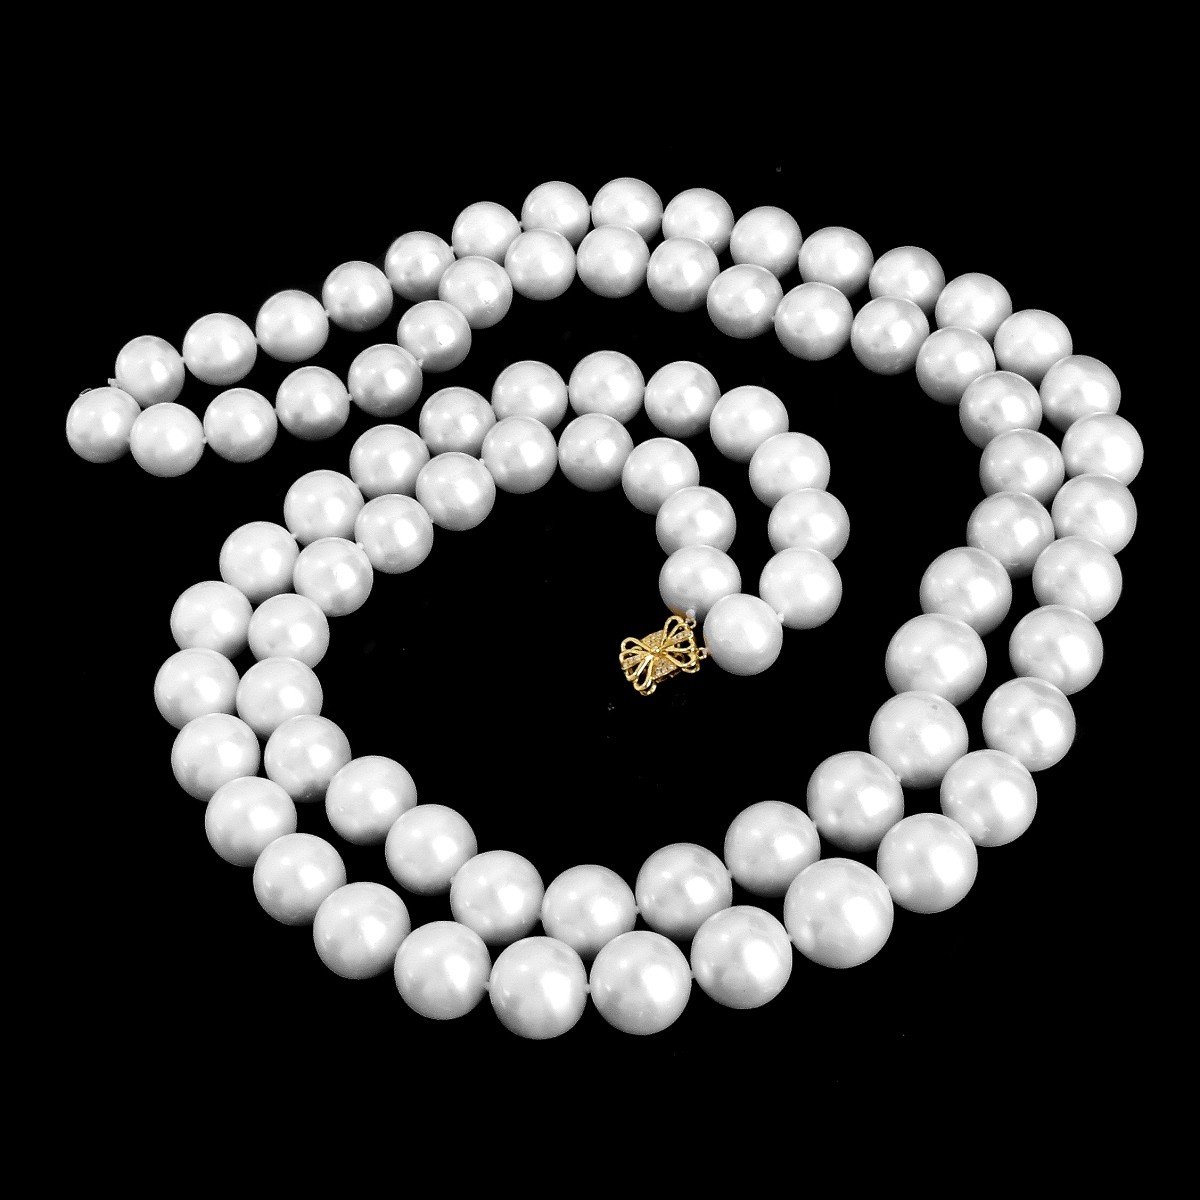 12-15mm South Sea Pearl Necklace